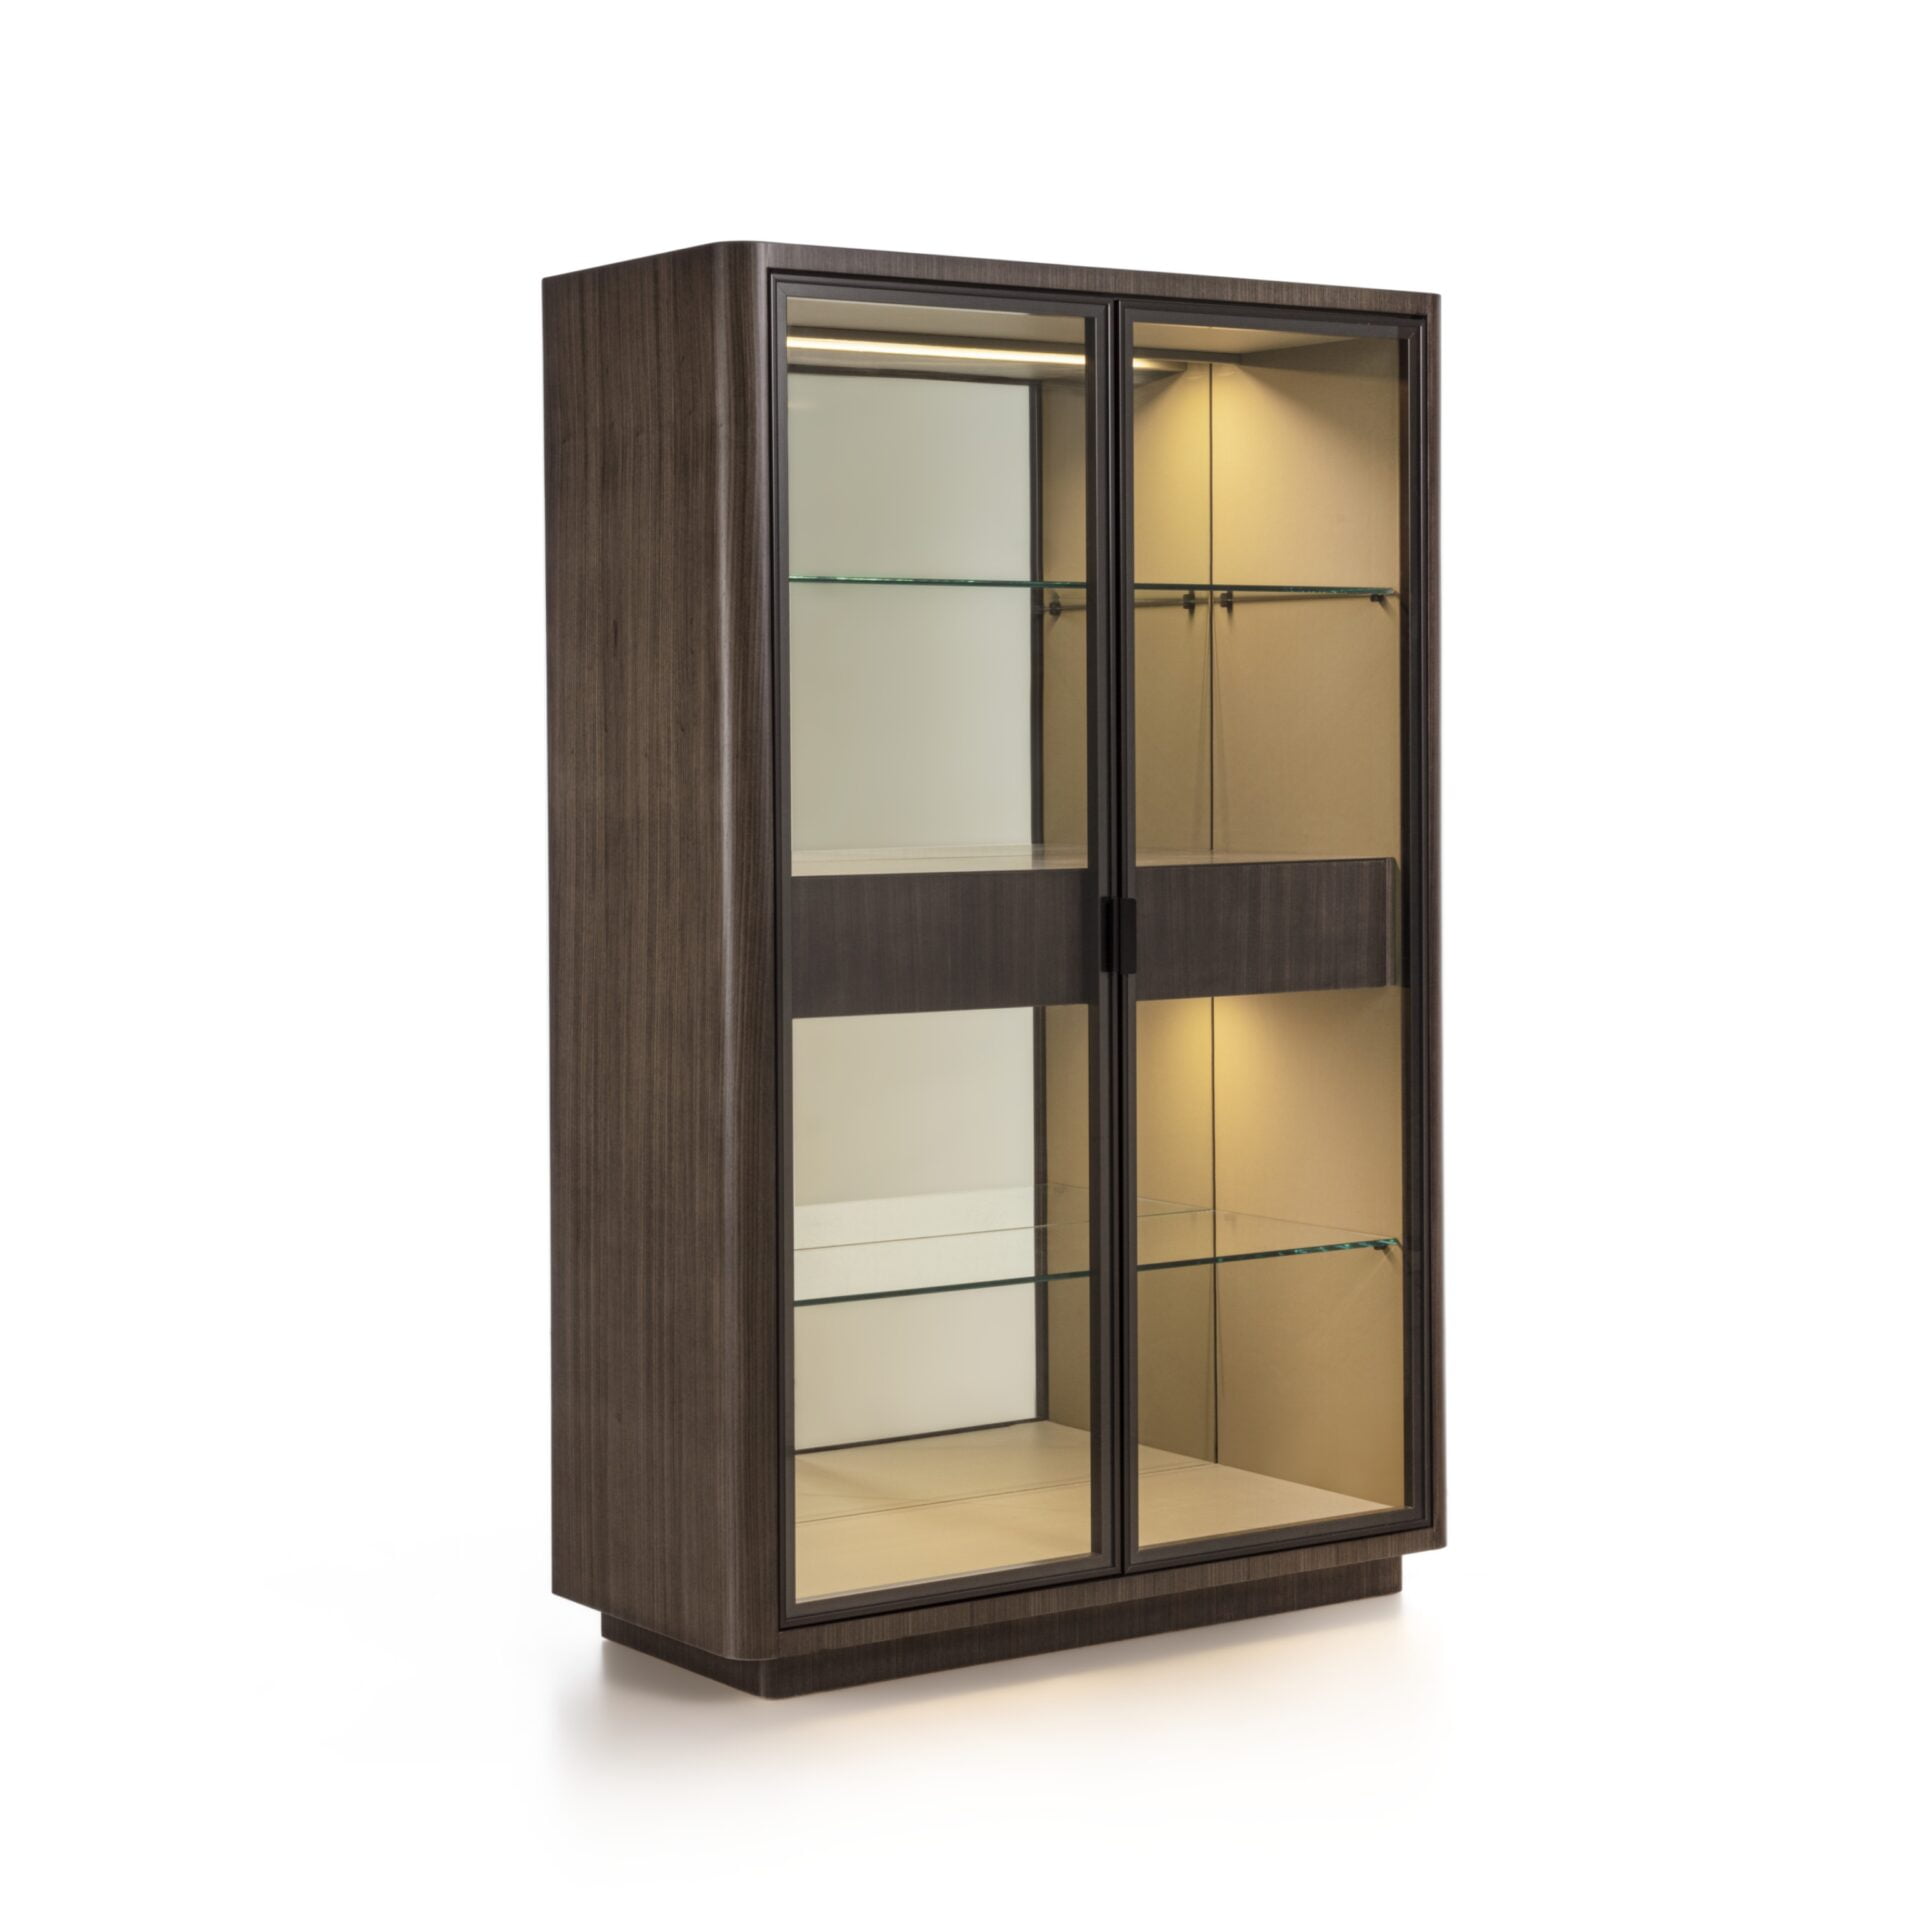 Dafne glass cabinet with drawers